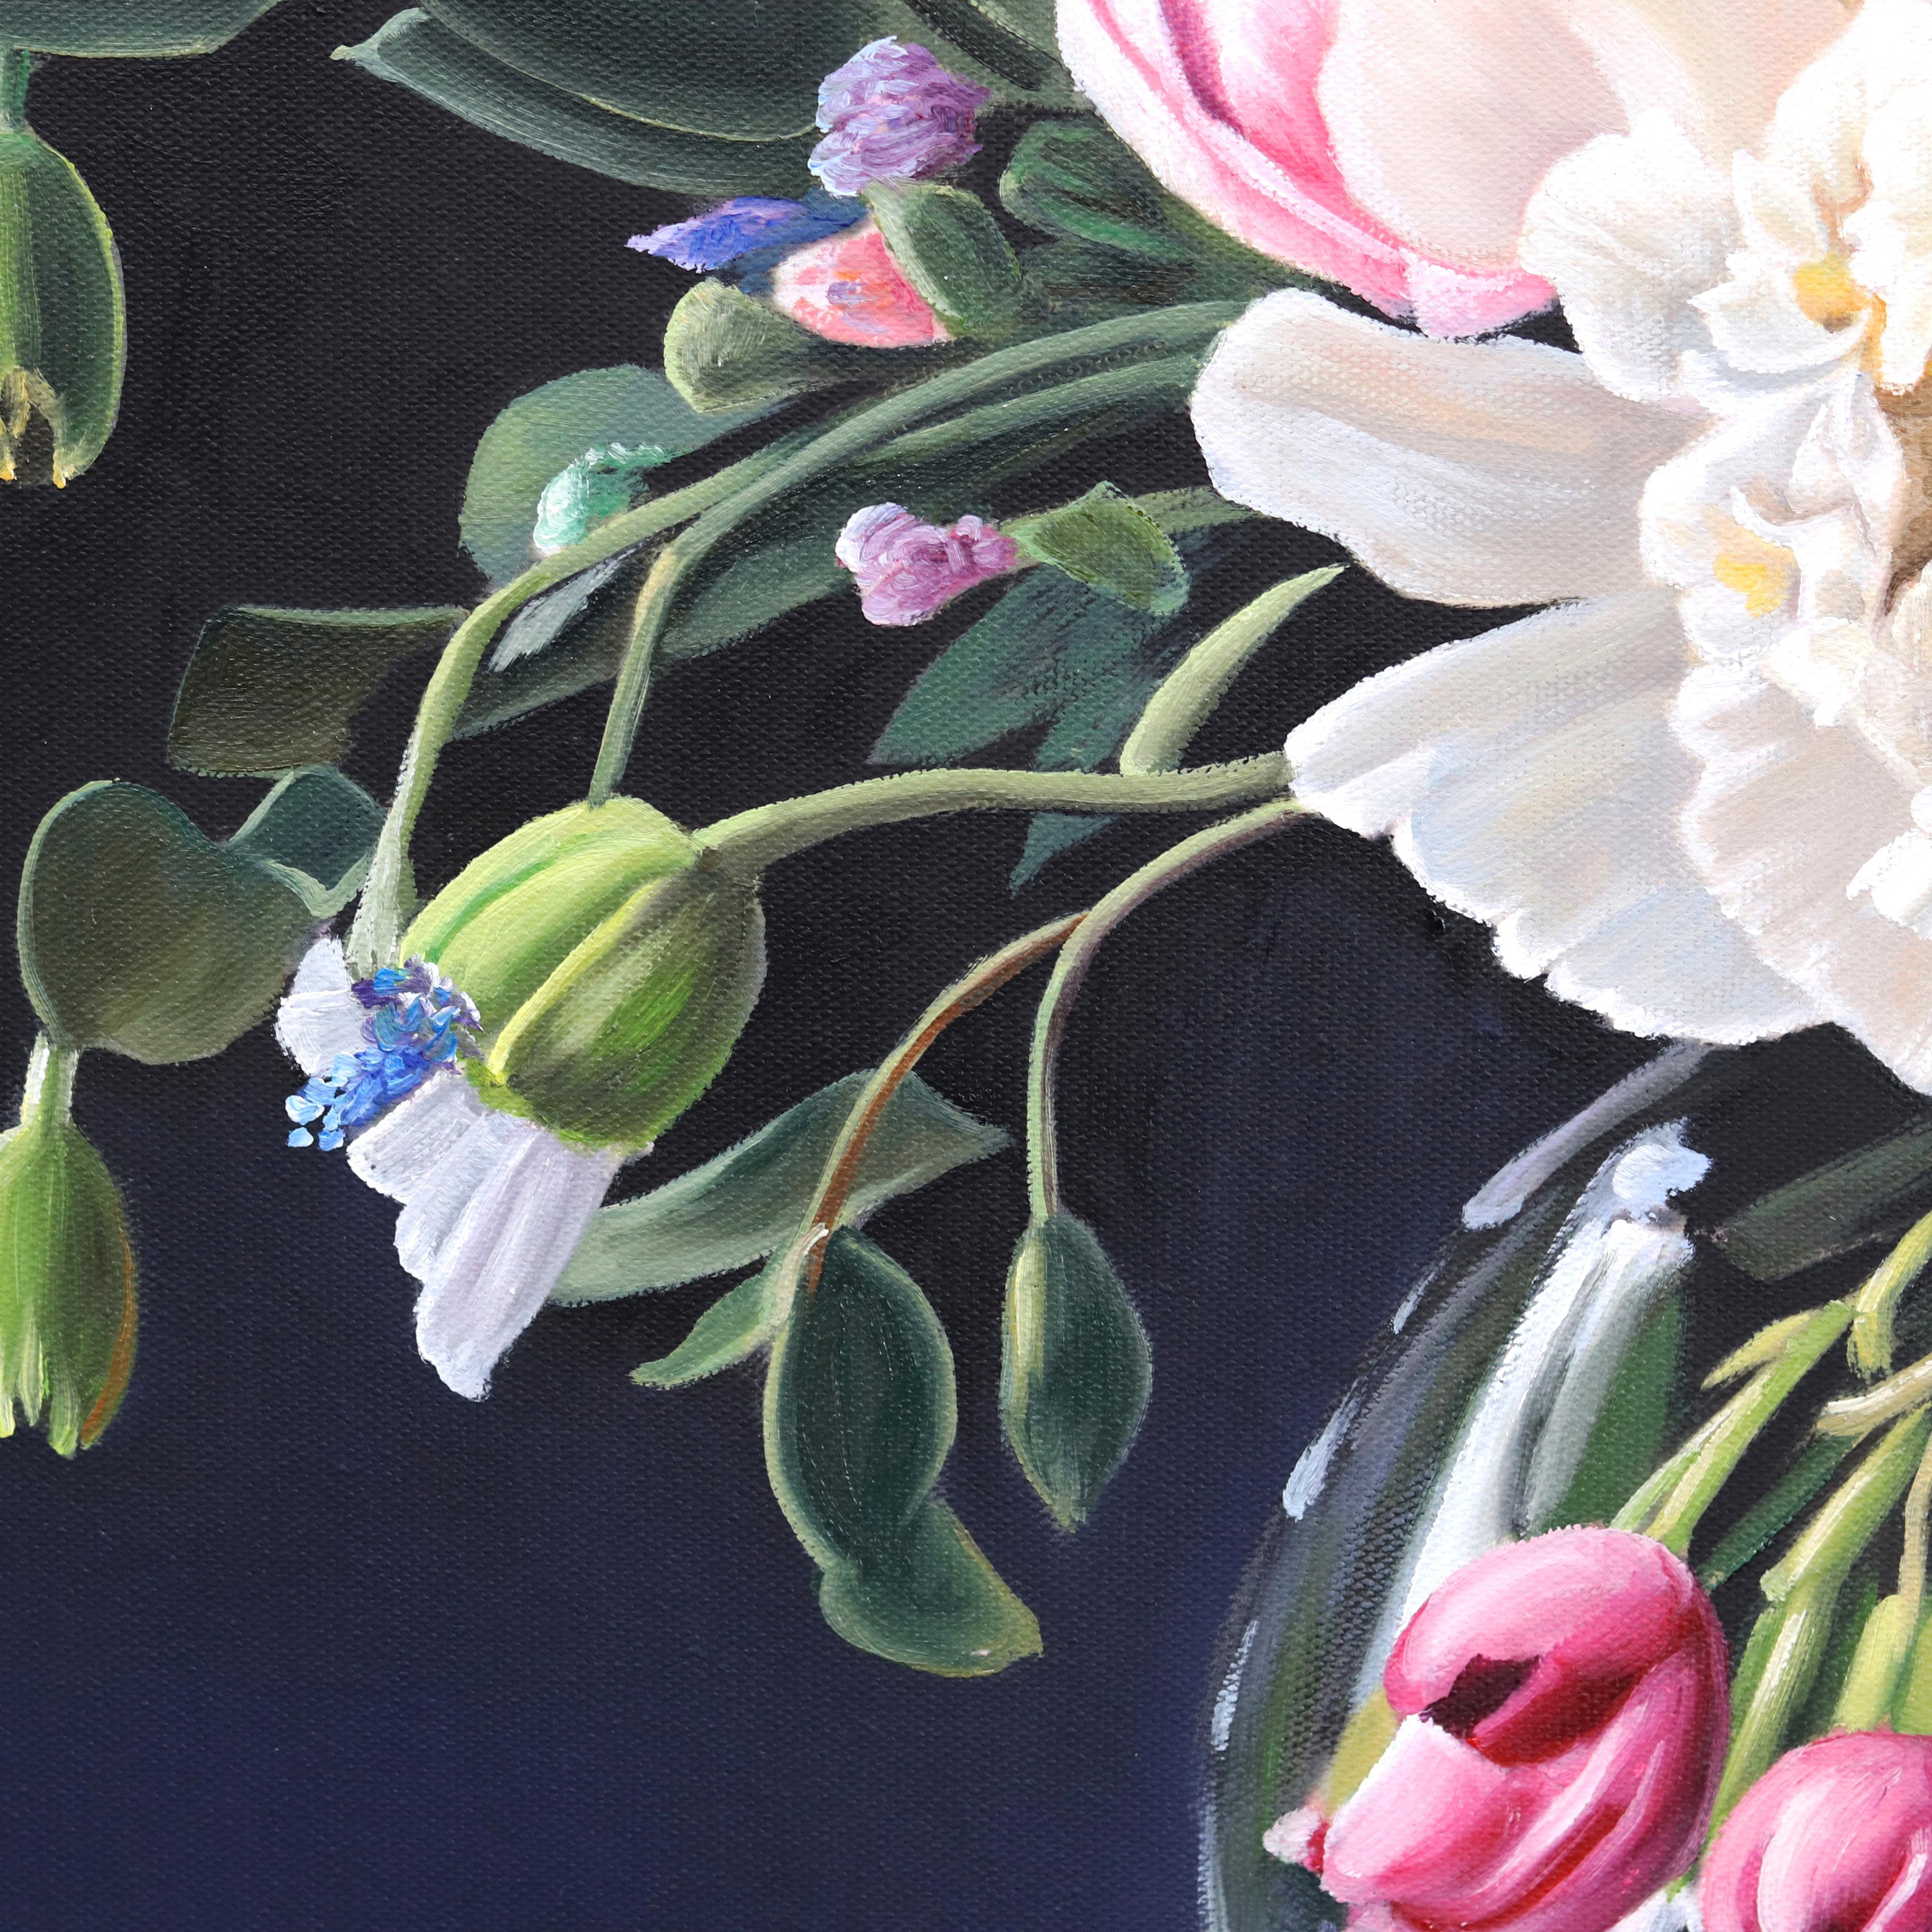 I Have Only My Dreams - Hyperrealist Botanical Floral Still Life Oil Painting 10